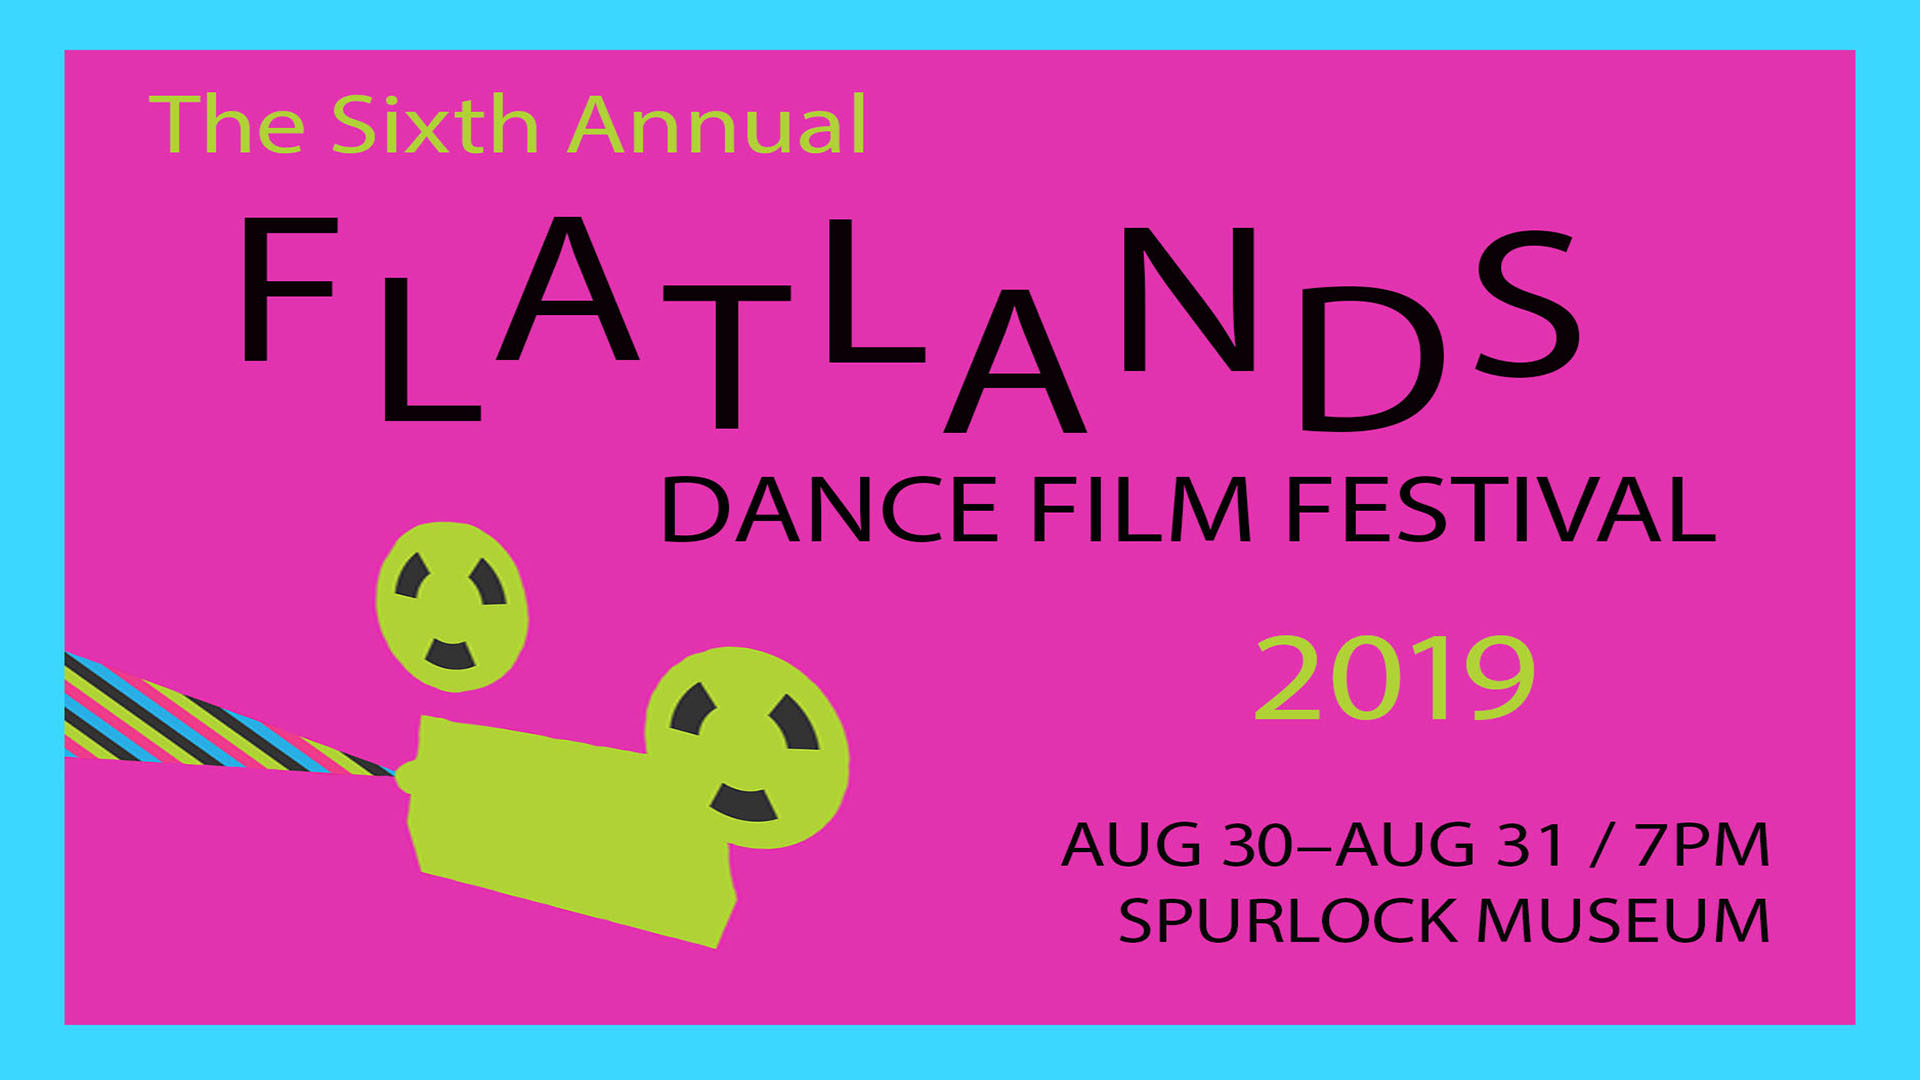 The Sixth Annual Flatlands Dance Film Festival 2019 August 30 to August 31 7pm Spurlock Museum with purple background and yellow camera with rainbow film tape coming out